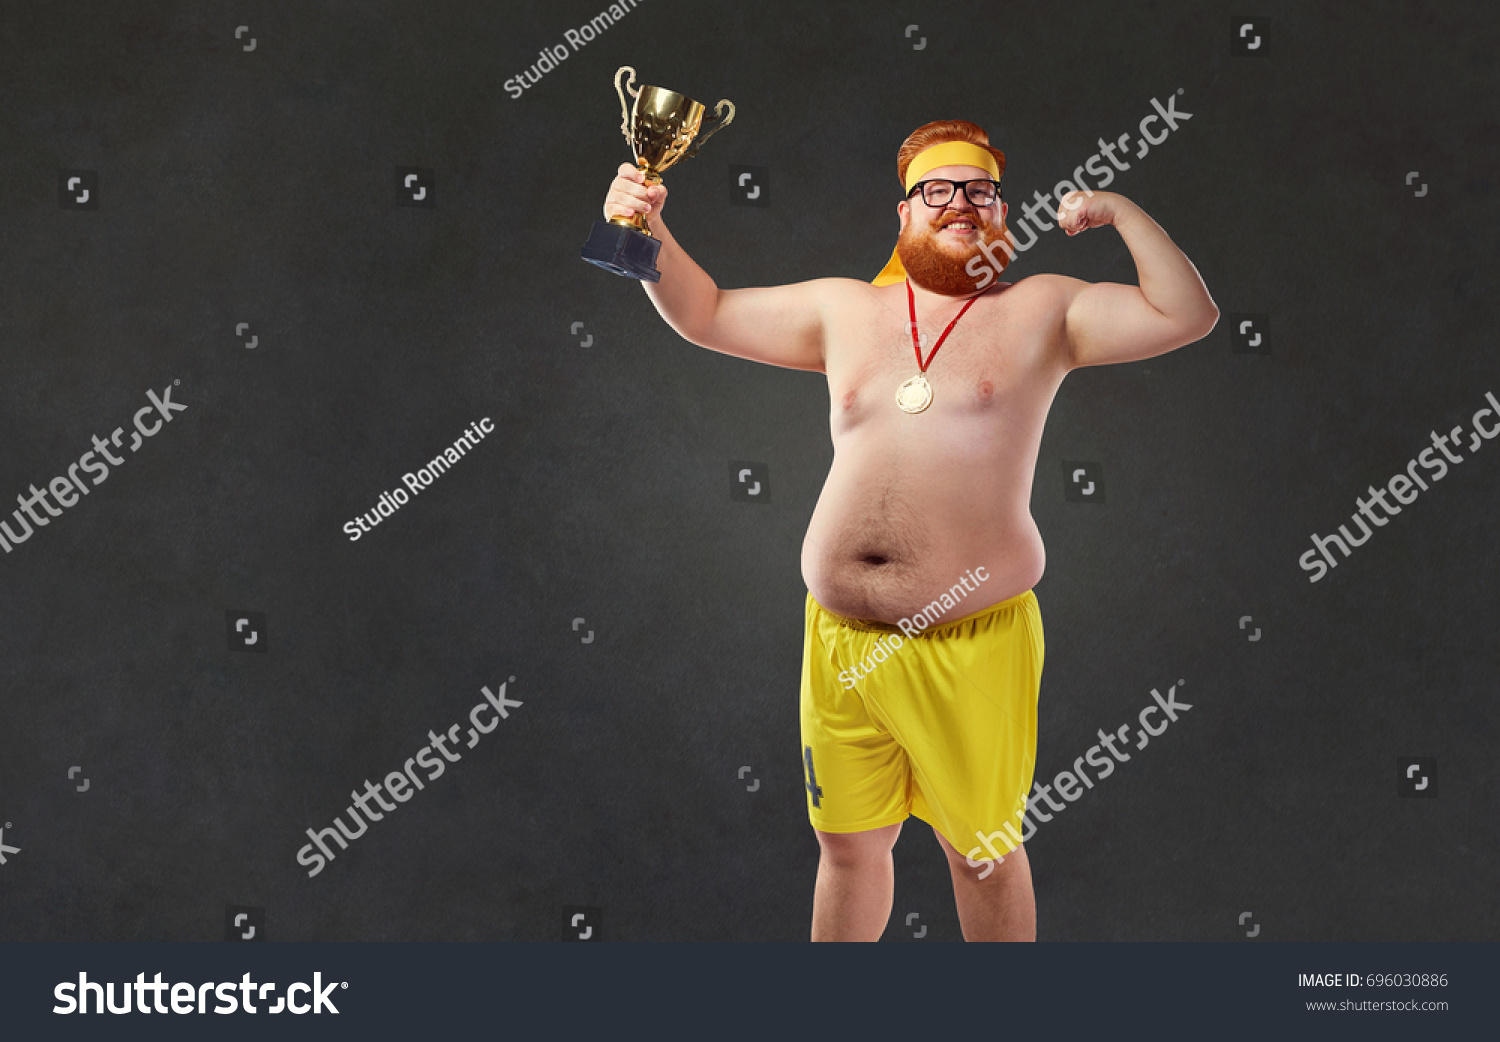 Fat Naked Man Champions Cup His库存照片696030886 Shutterstock